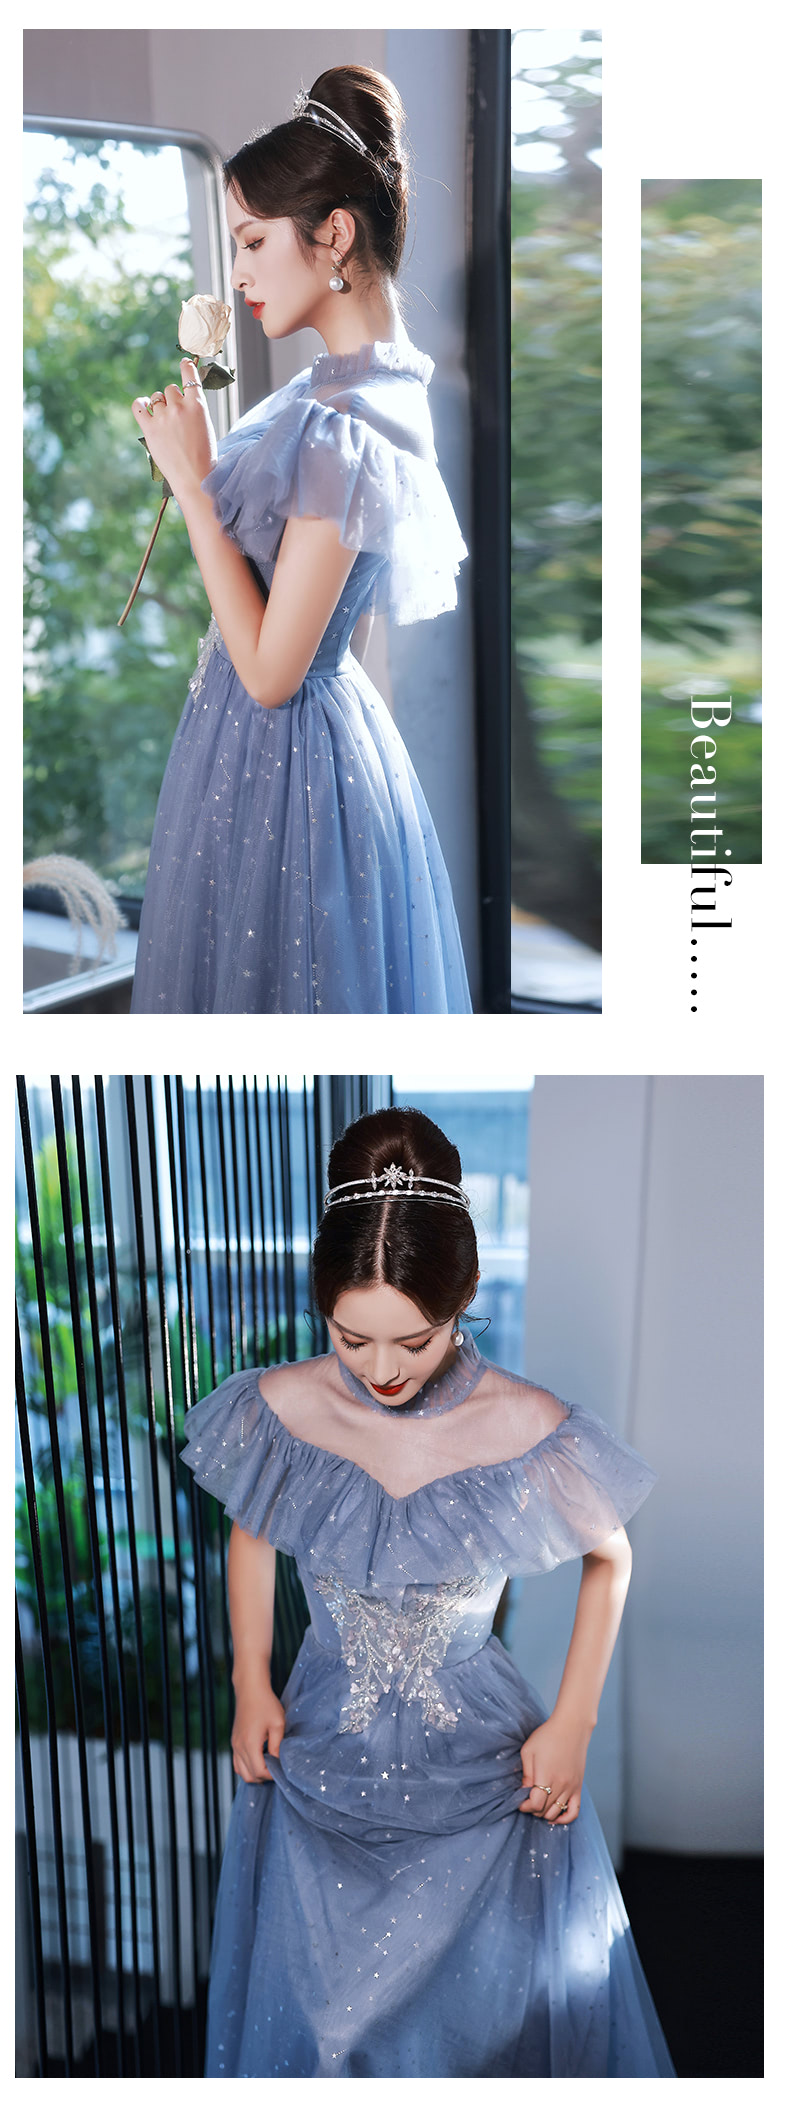 Fashion-Off-the-Shoulder-Long-Blue-Cocktail-Party-Prom-Dress13.jpg